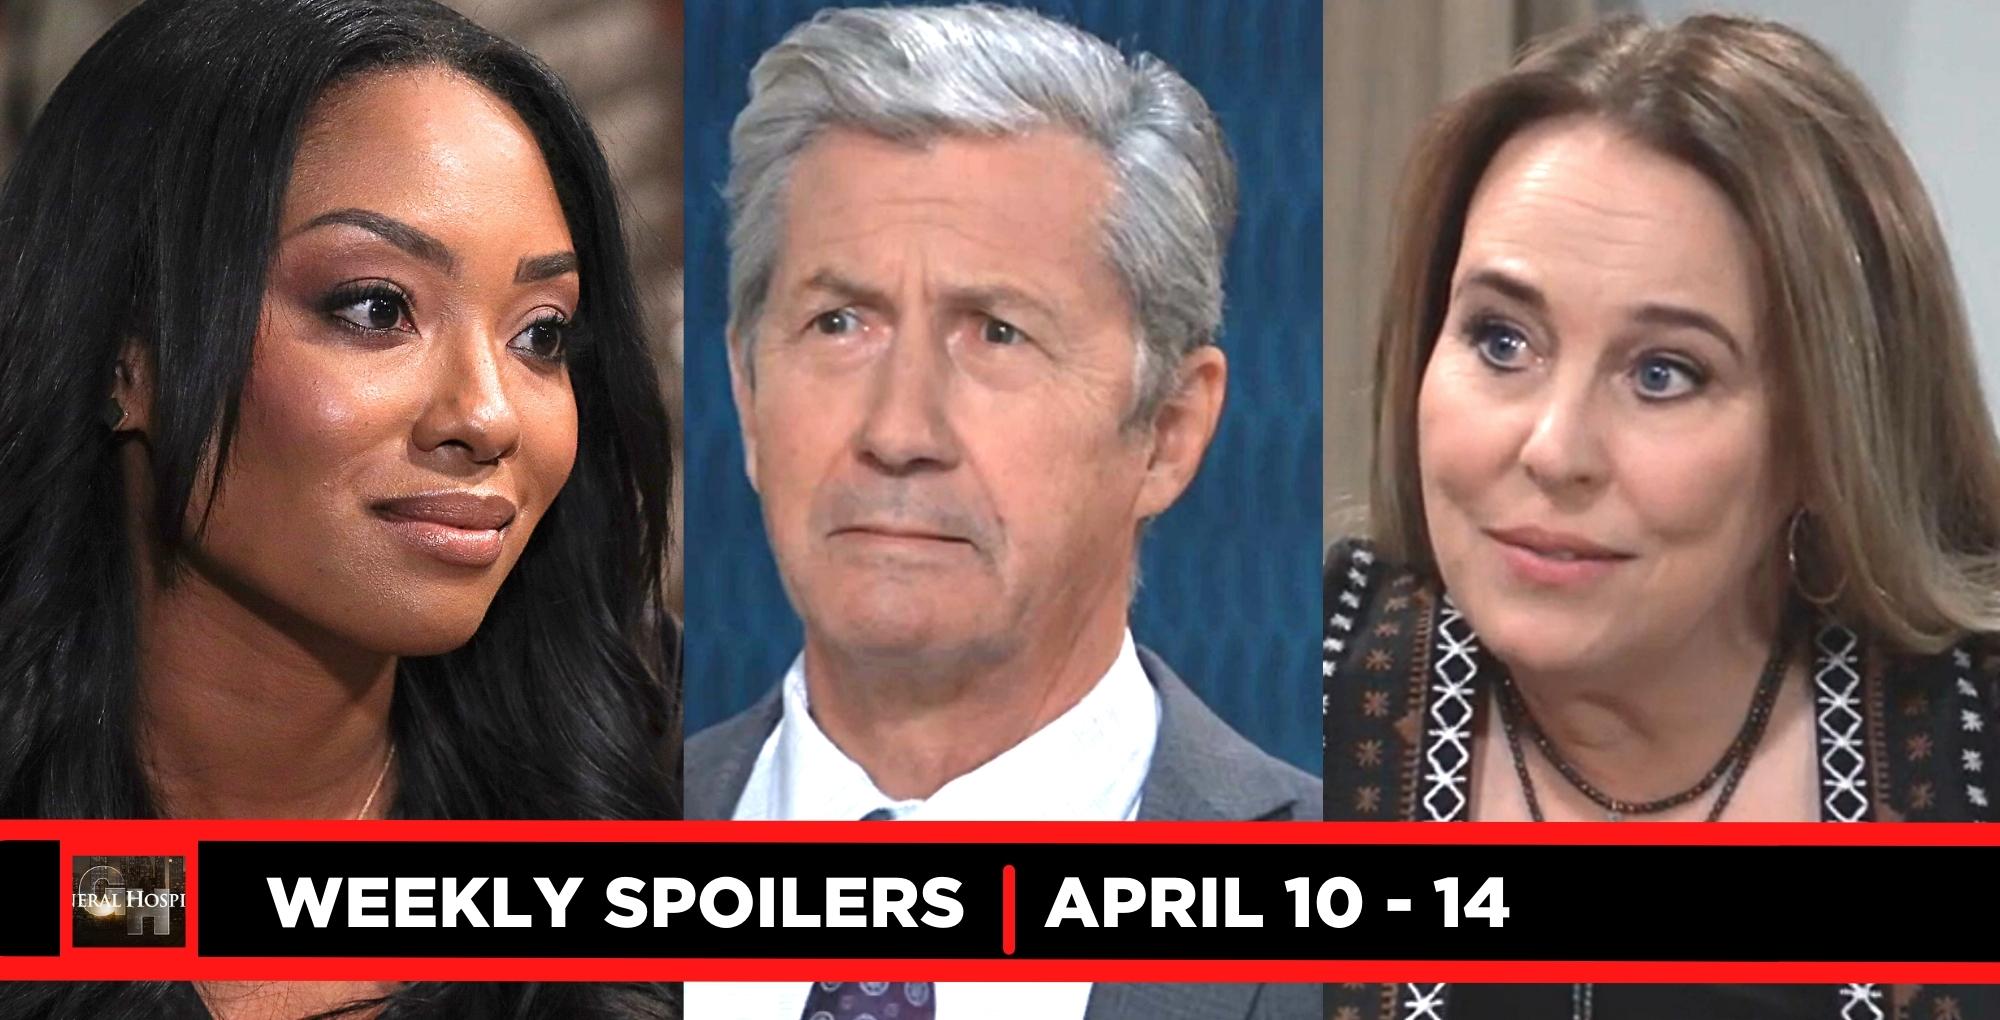 Weekly General Hospital Spoilers Schemes, Hostages, and Danger